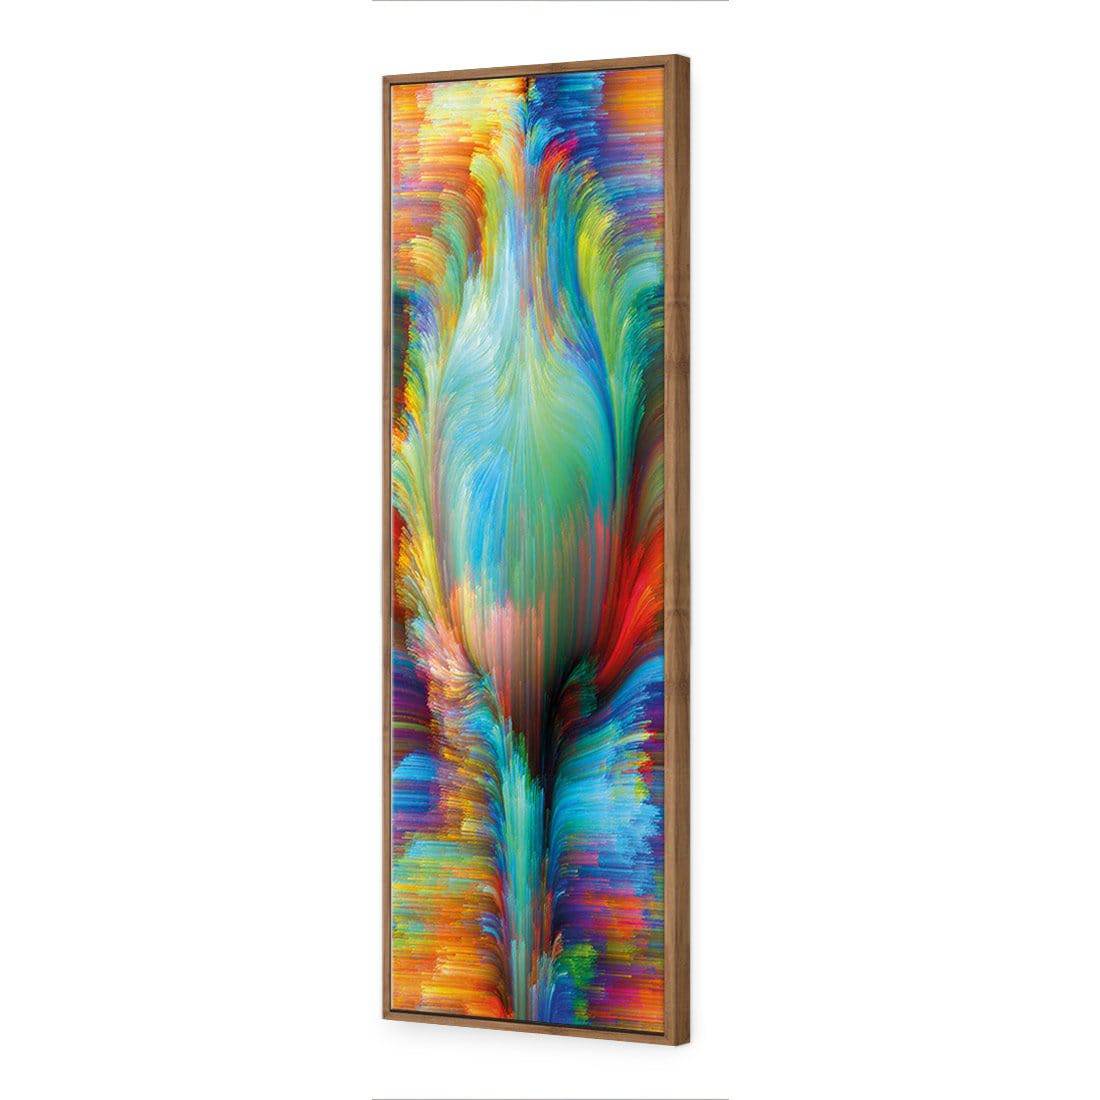 Fuzz Sprouting Canvas Art-Canvas-Wall Art Designs-60x20cm-Canvas - Natural Frame-Wall Art Designs